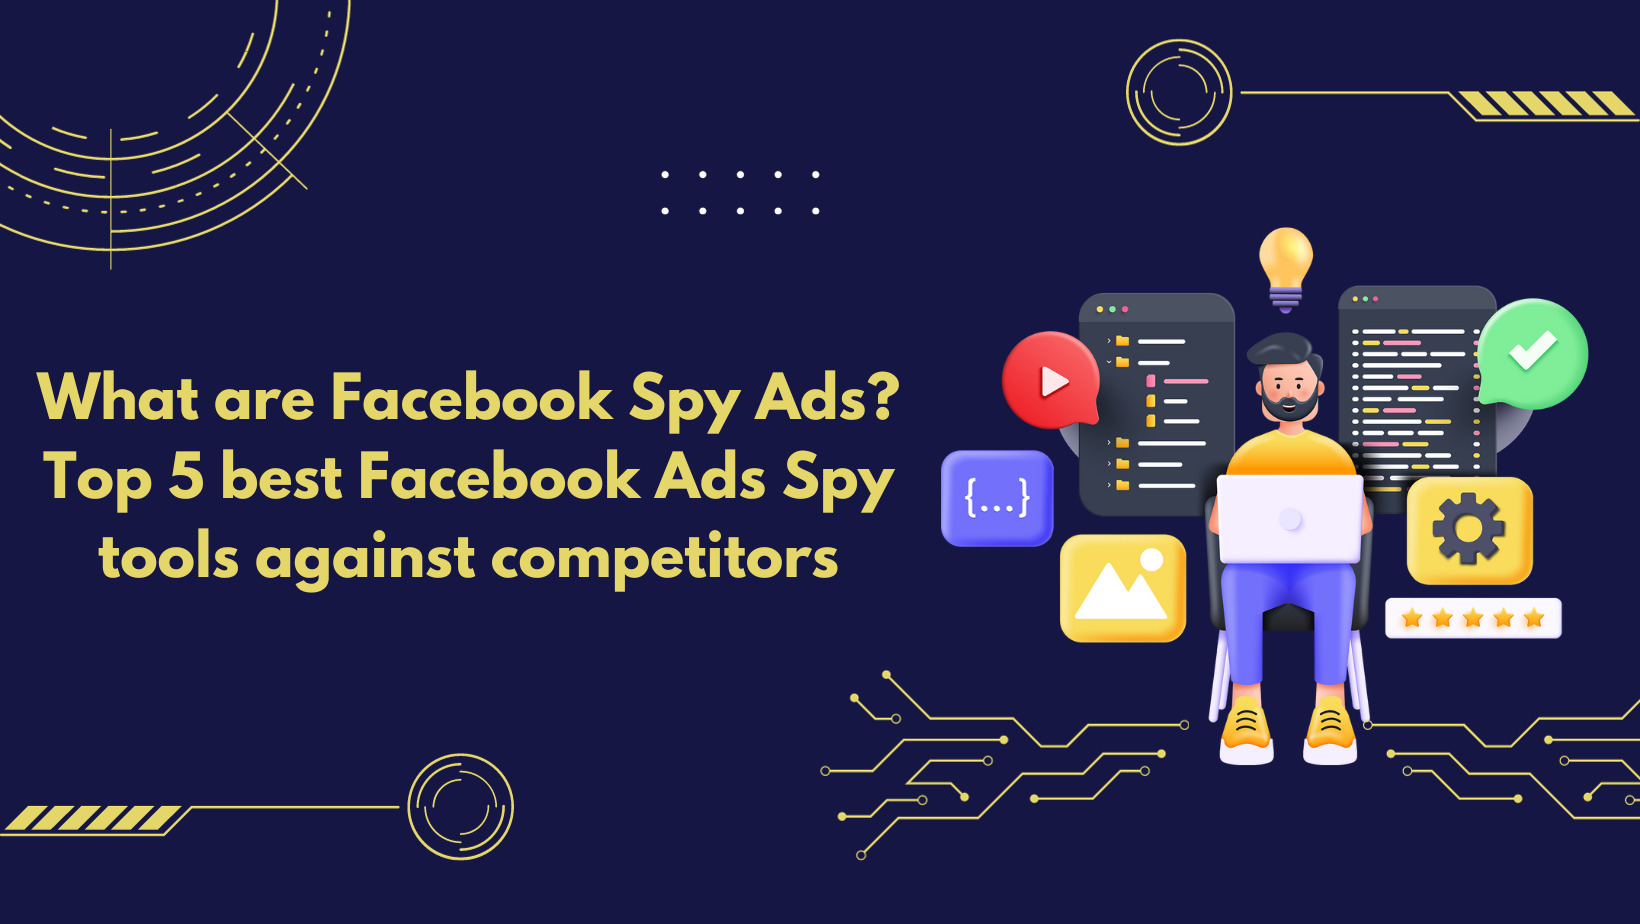 What is spy advertising on Facebook? Top 5 best Facebook Ads Spy tools compared to competitors